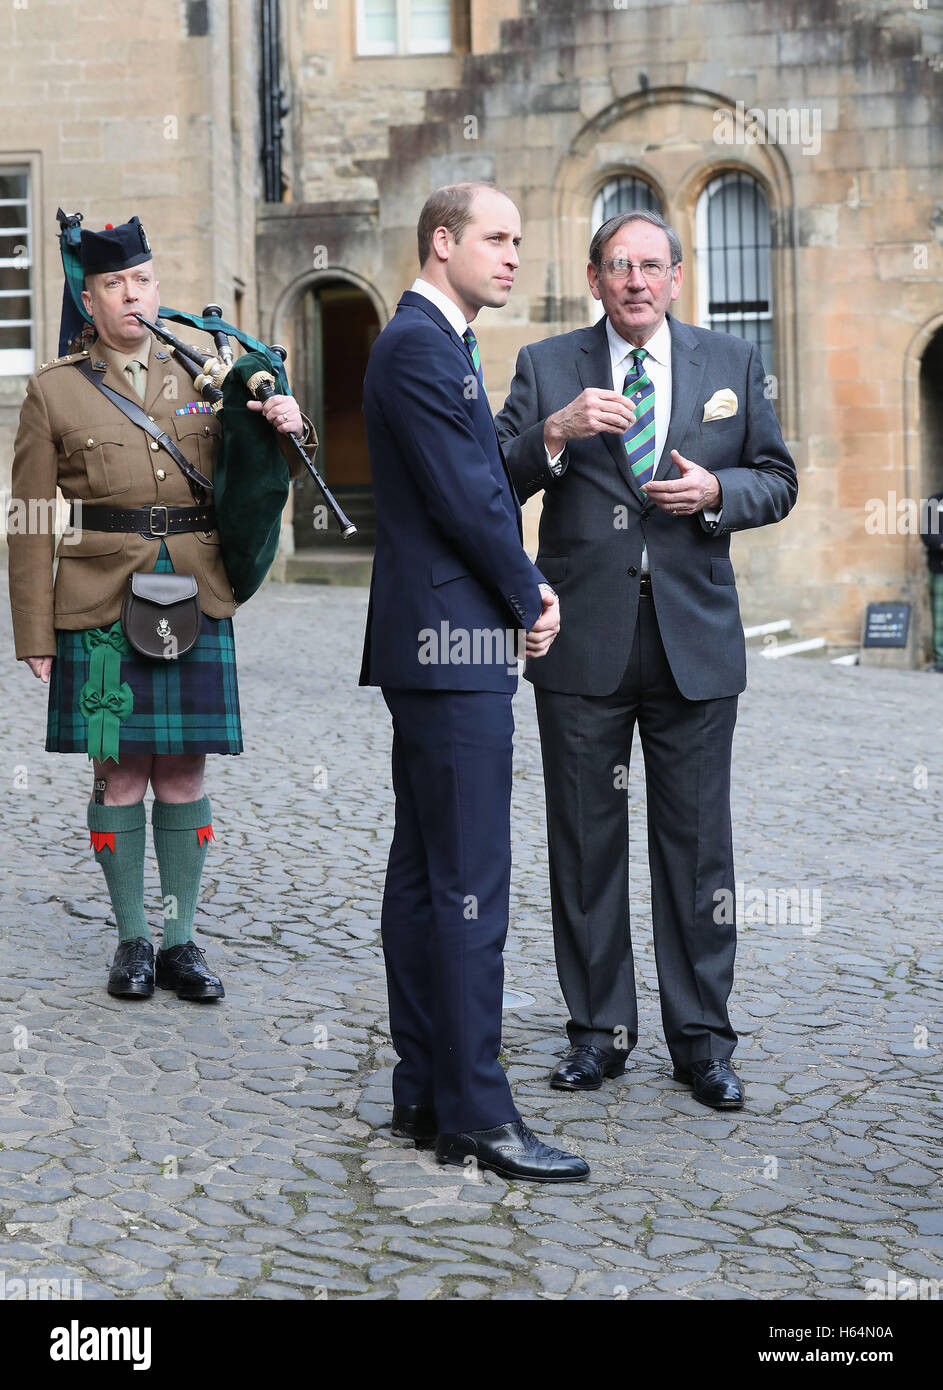 The Duke of Cambridge, known as the Earl of Strathearn in Scotland (centre) talks to project director Col AK Miller (right) as he arrives at Argyll and Sutherland Highlanders Regimental Museum at Stirling Castle. Stock Photo